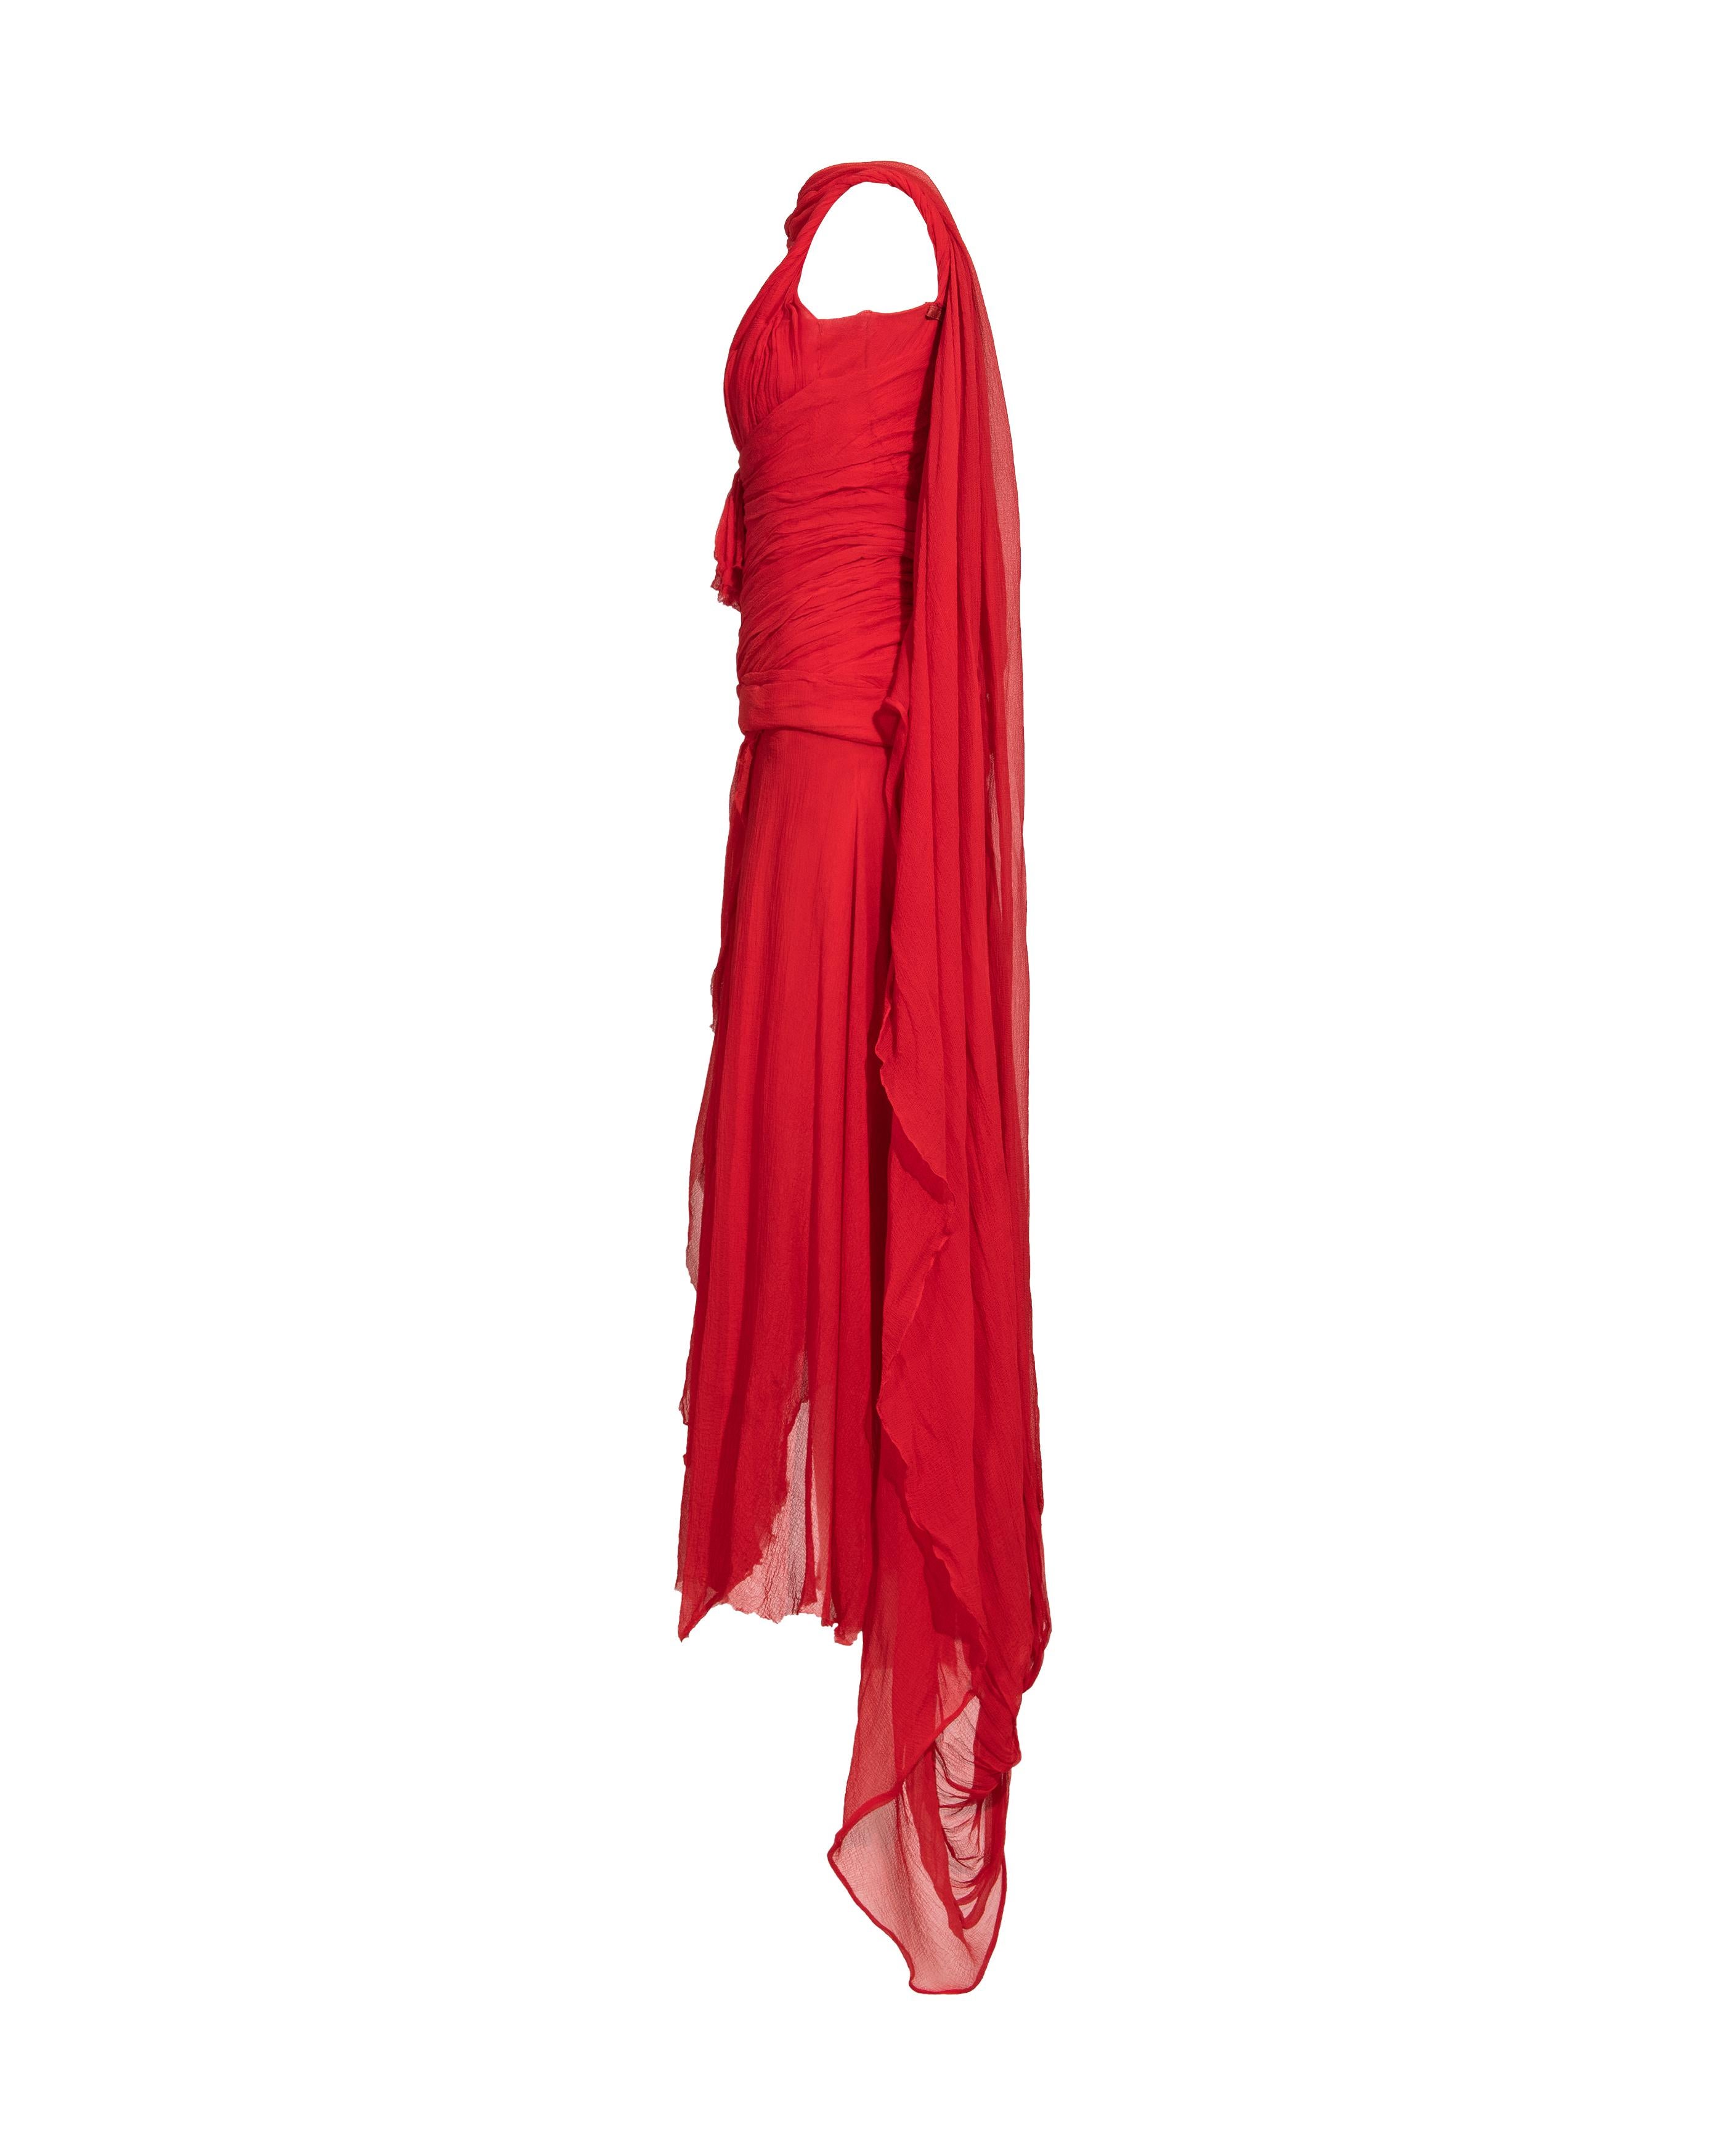 S/S 2003 Alexander McQueen  'Irere' Collection Red Silk Chiffon Gown with Sash For Sale 1